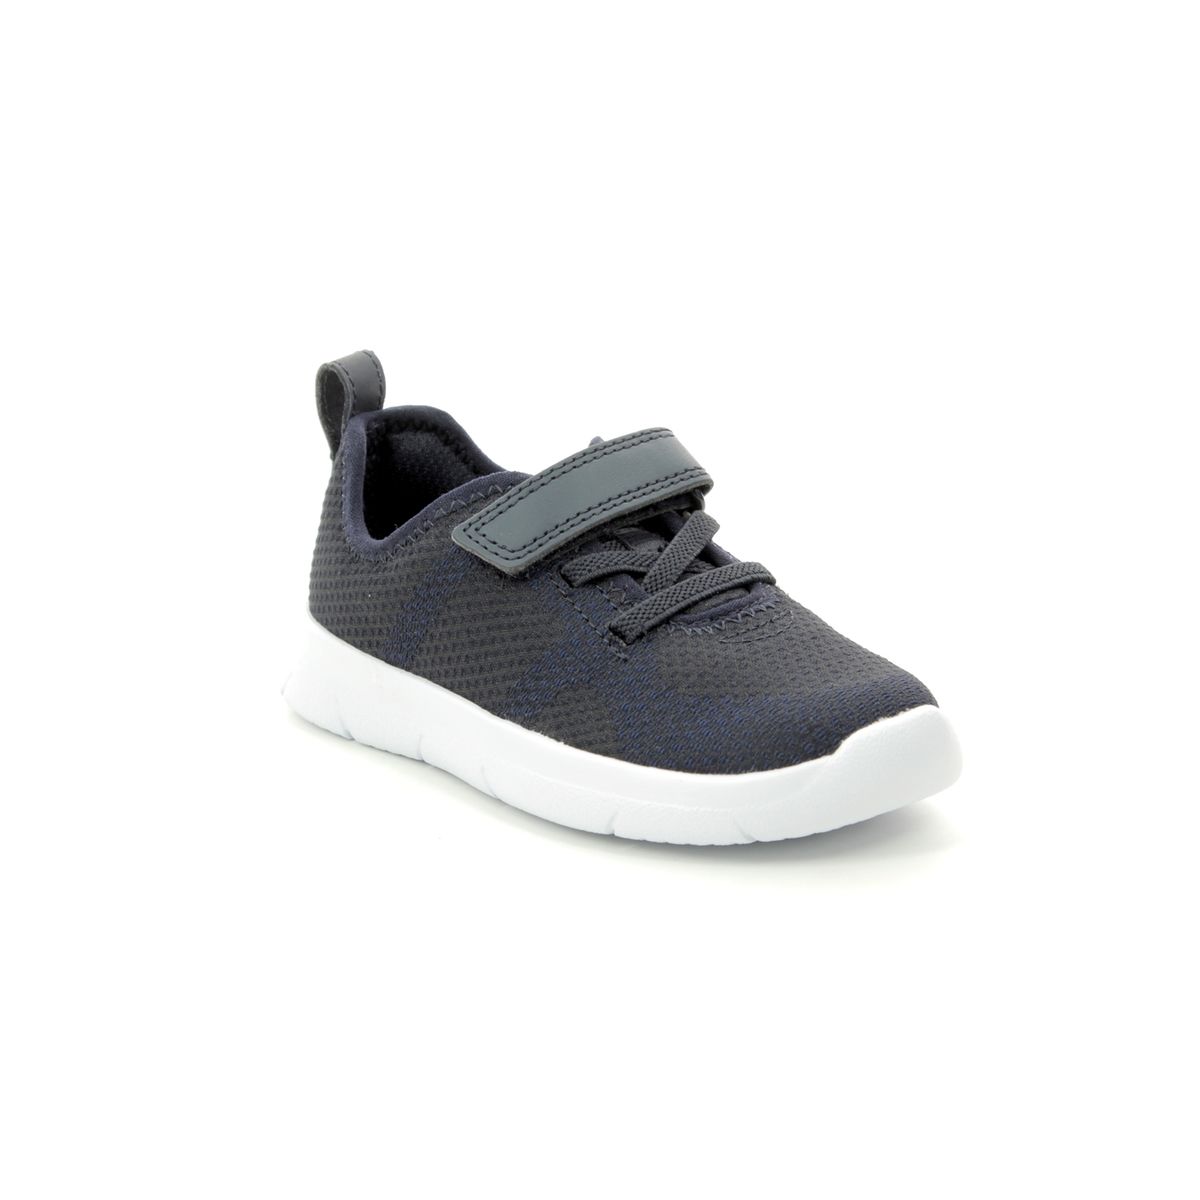 Clarks Ath Flux T Navy Kids Toddler Boys Trainers 412697G In Size 6.5 In Plain Navy G Width Fitting For kids